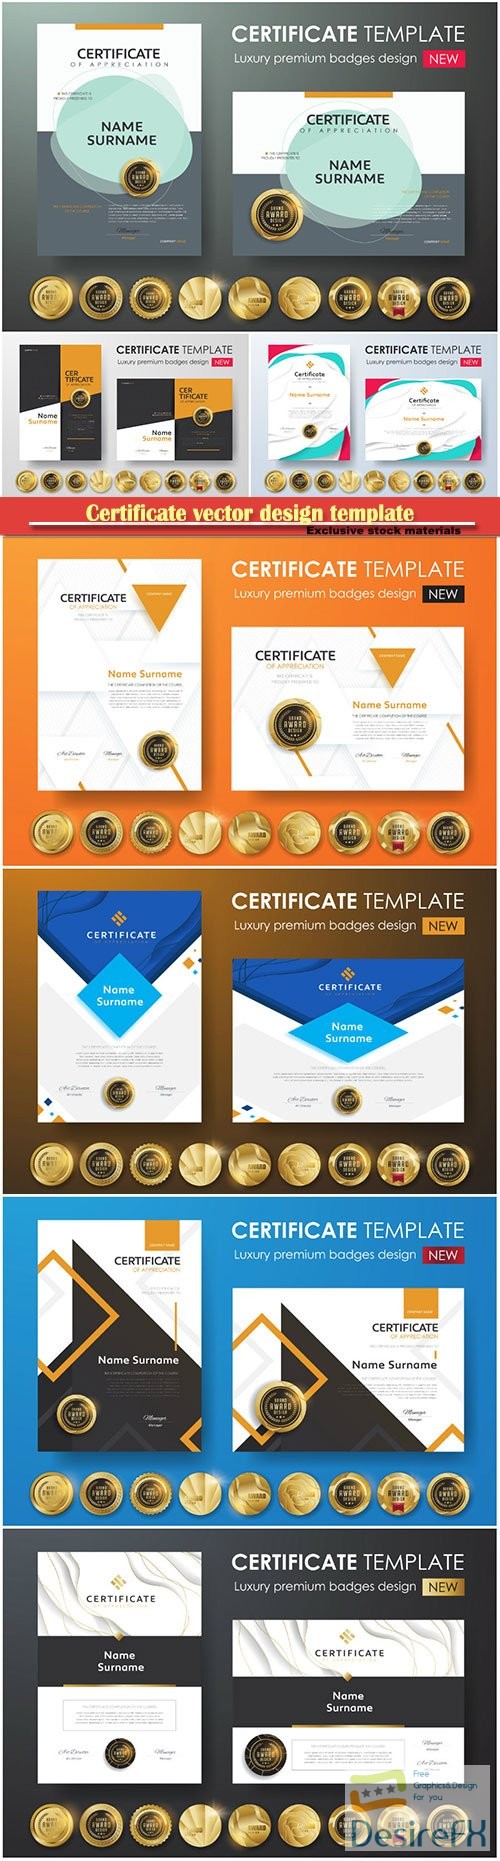 Certificate and vector diploma design template # 64